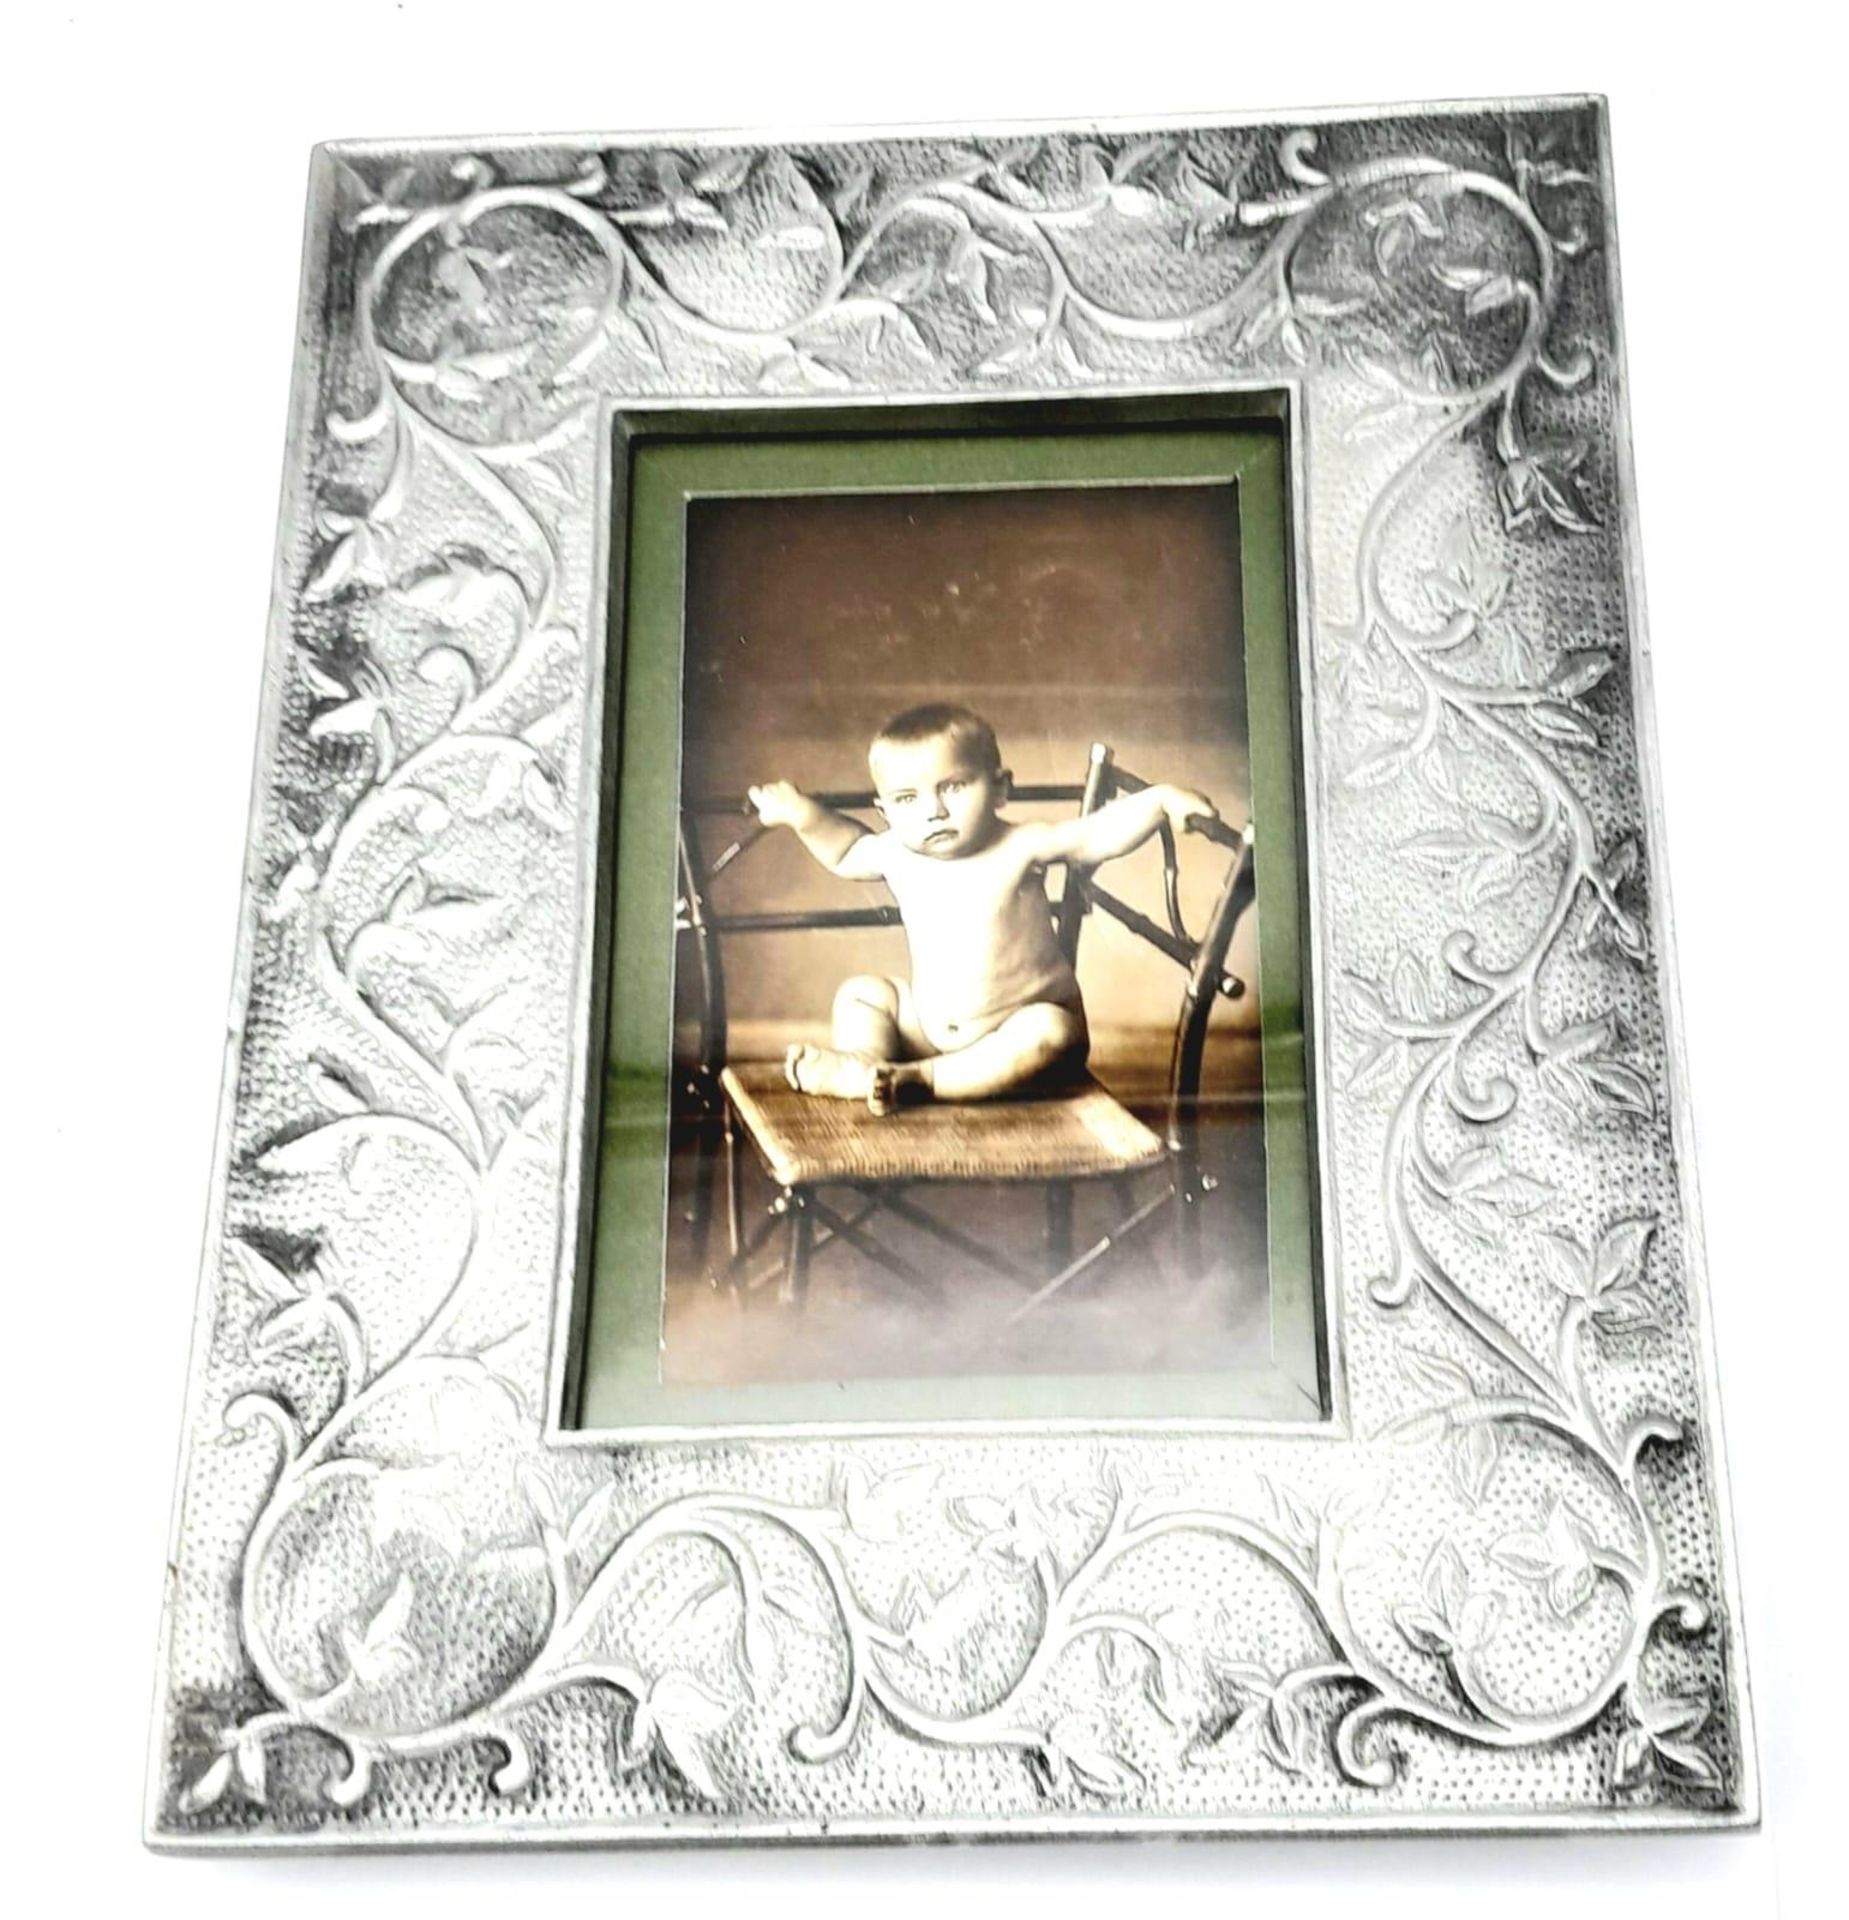 A vintage pewter photo-frame with a photo of a toddler: Donald Trump – Ex President of U.S.A. This